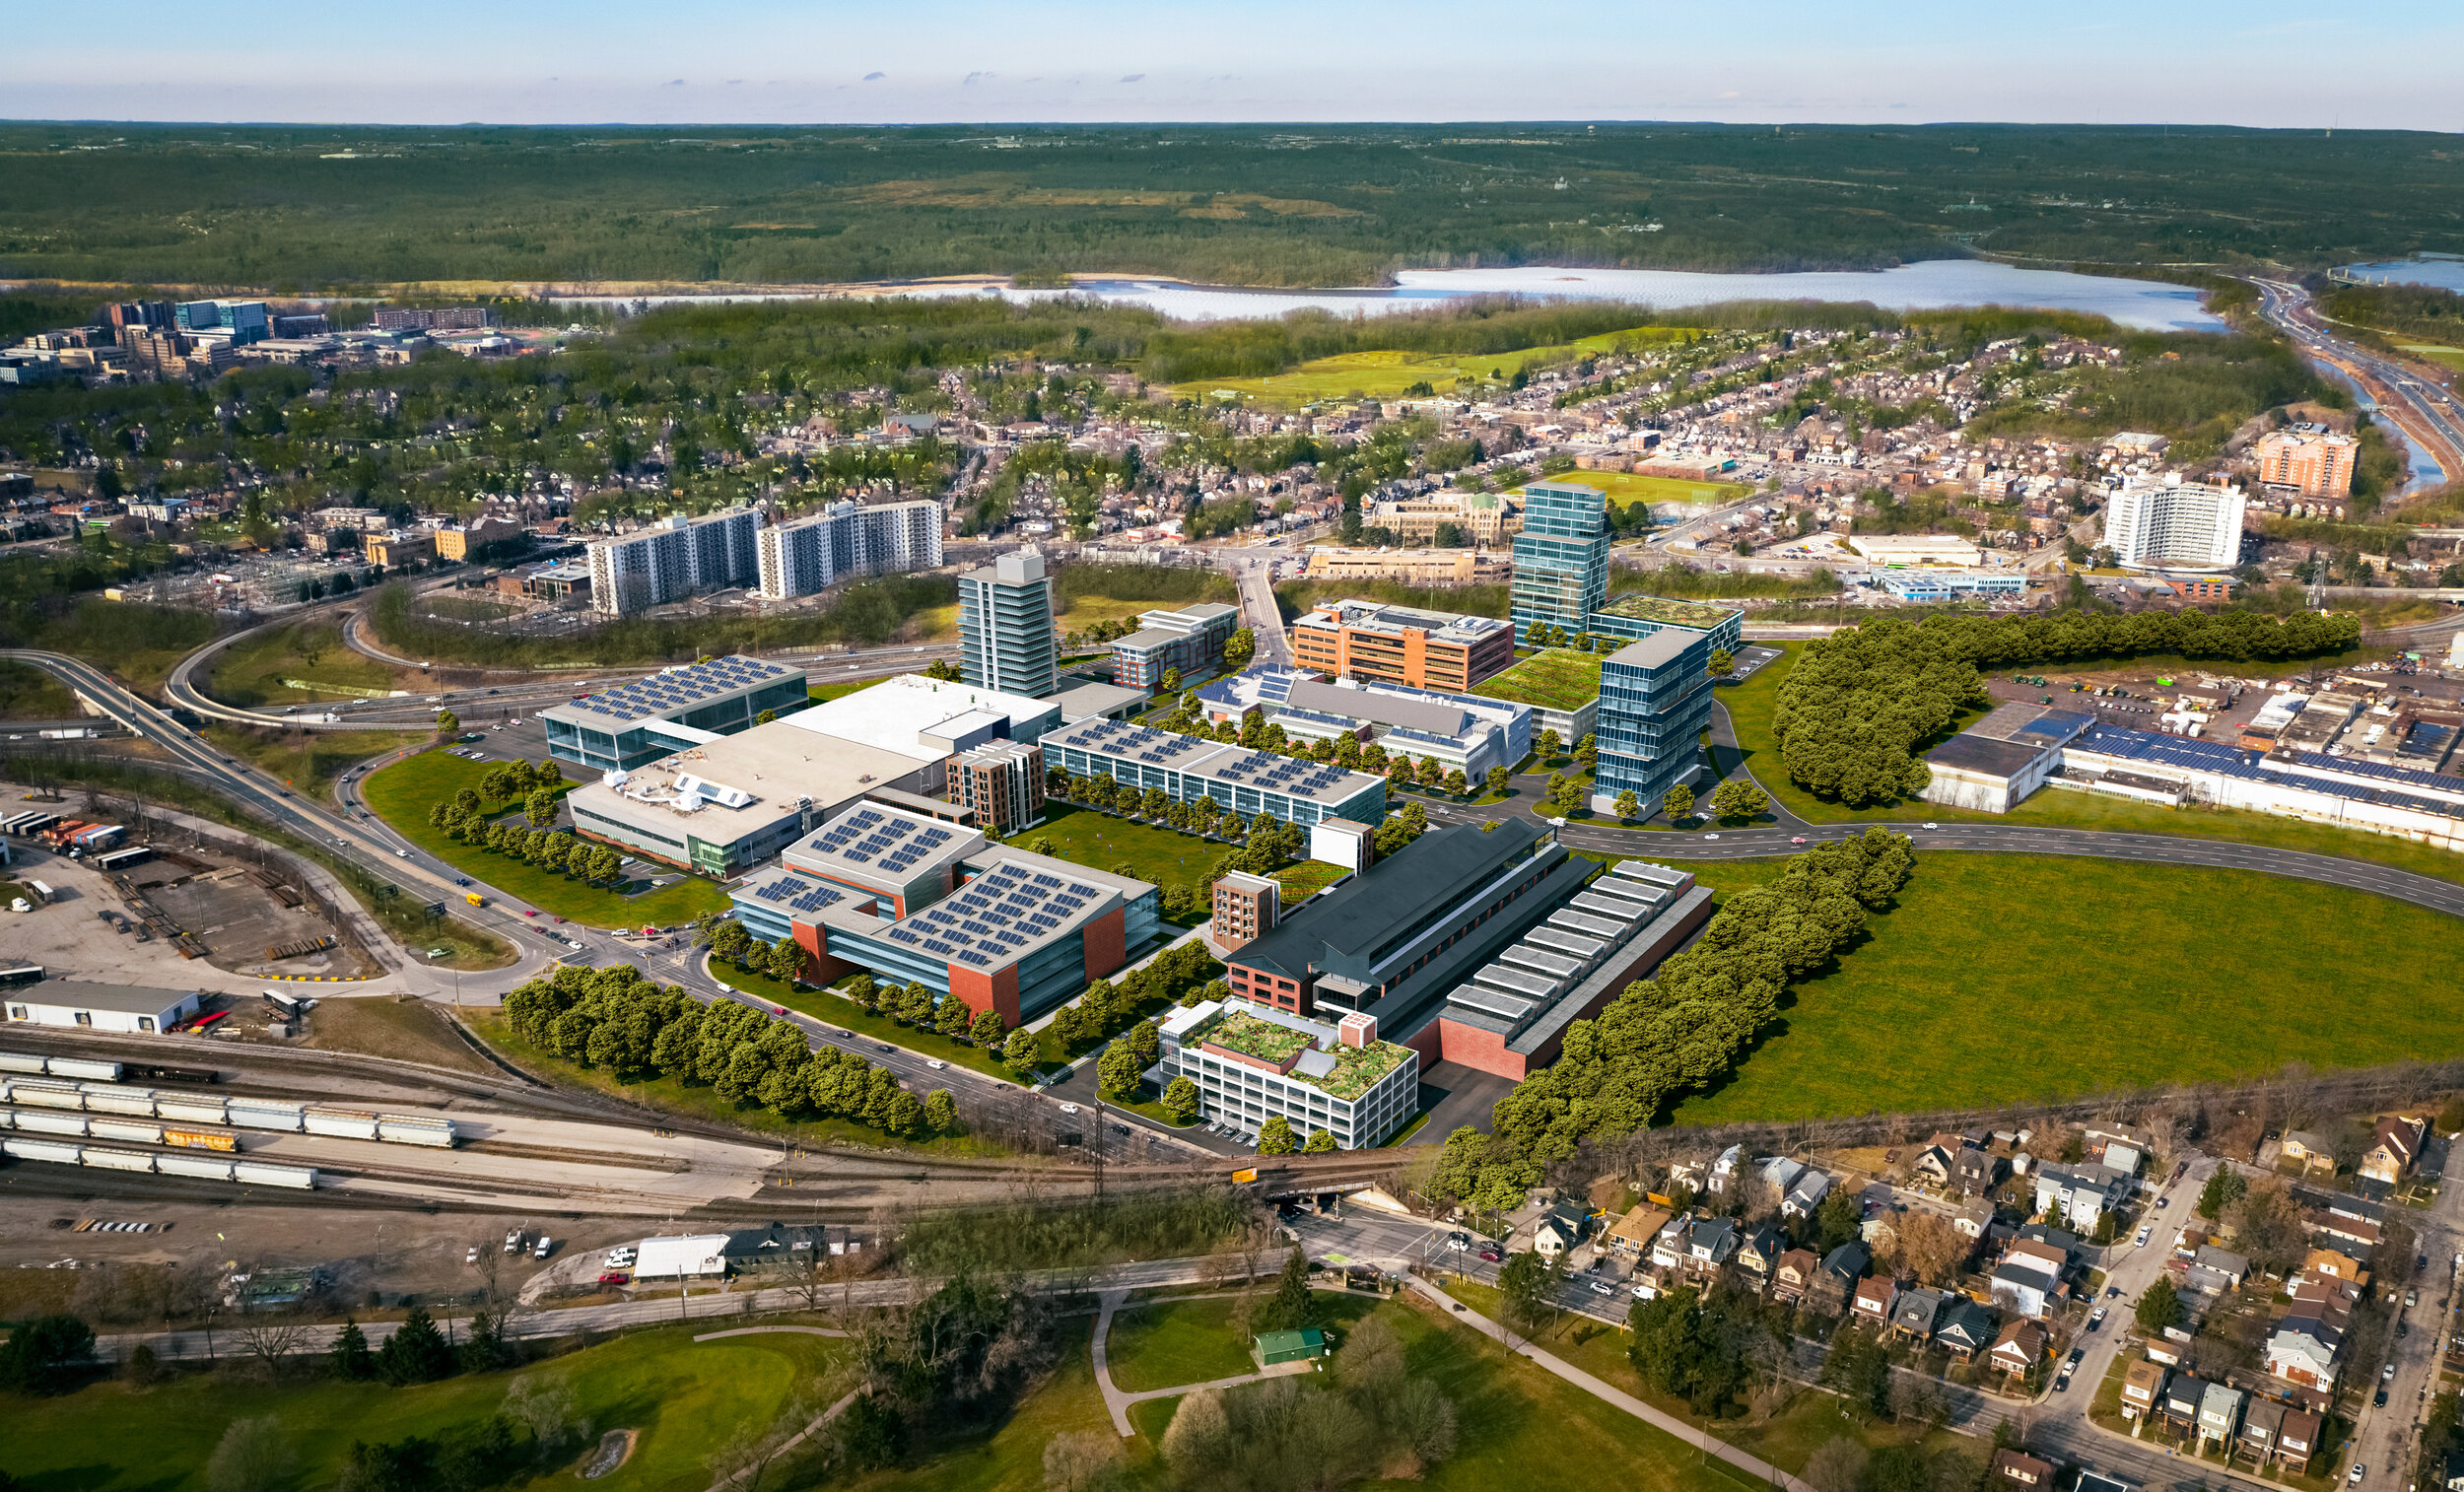 About Enedym - Enedym designs and builds electric propulsion motors, located in McMaster Innovation Park, overhead view of McMaster Innovation Park, Hamilton Ontario